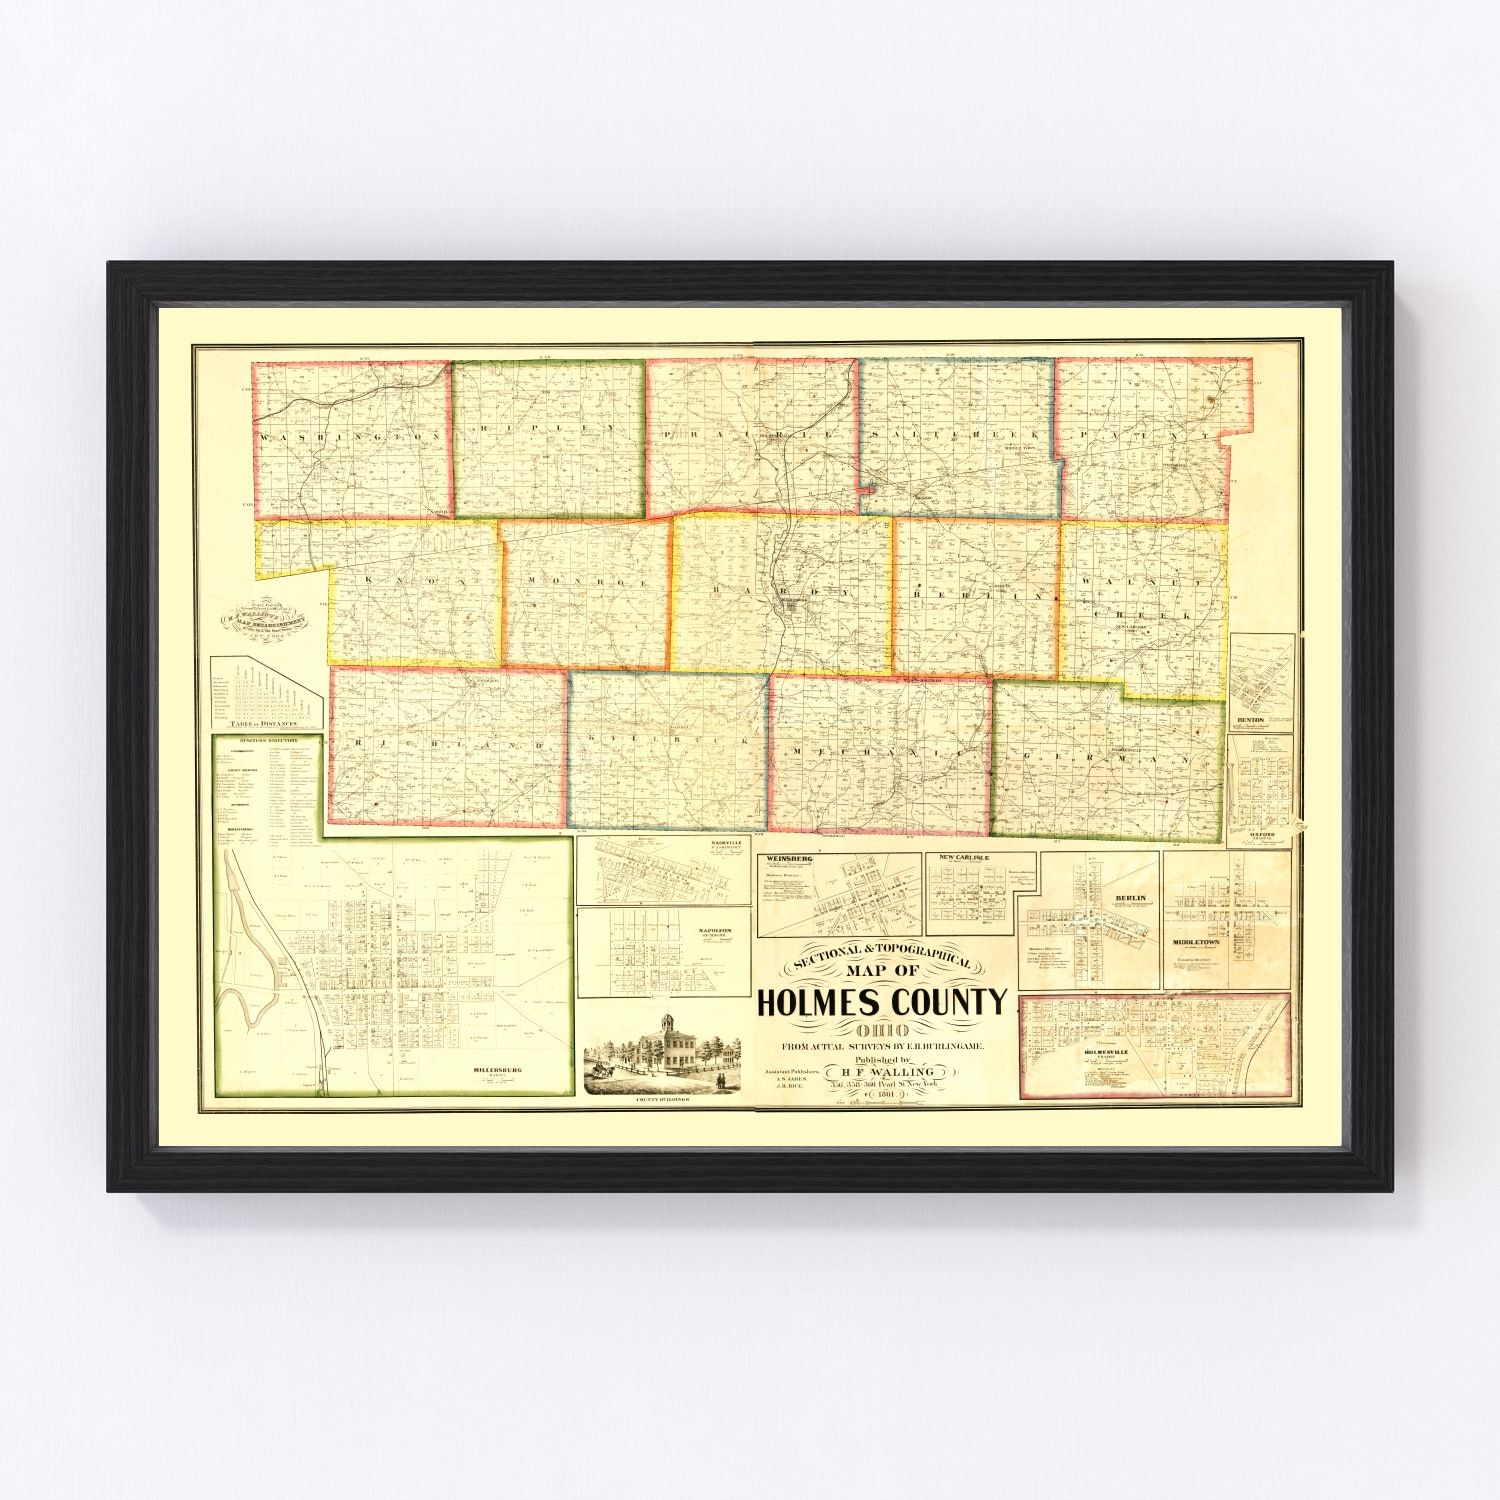 Vintage Map Of Holmes County Ohio 1861 By Teds Vintage Art 0247